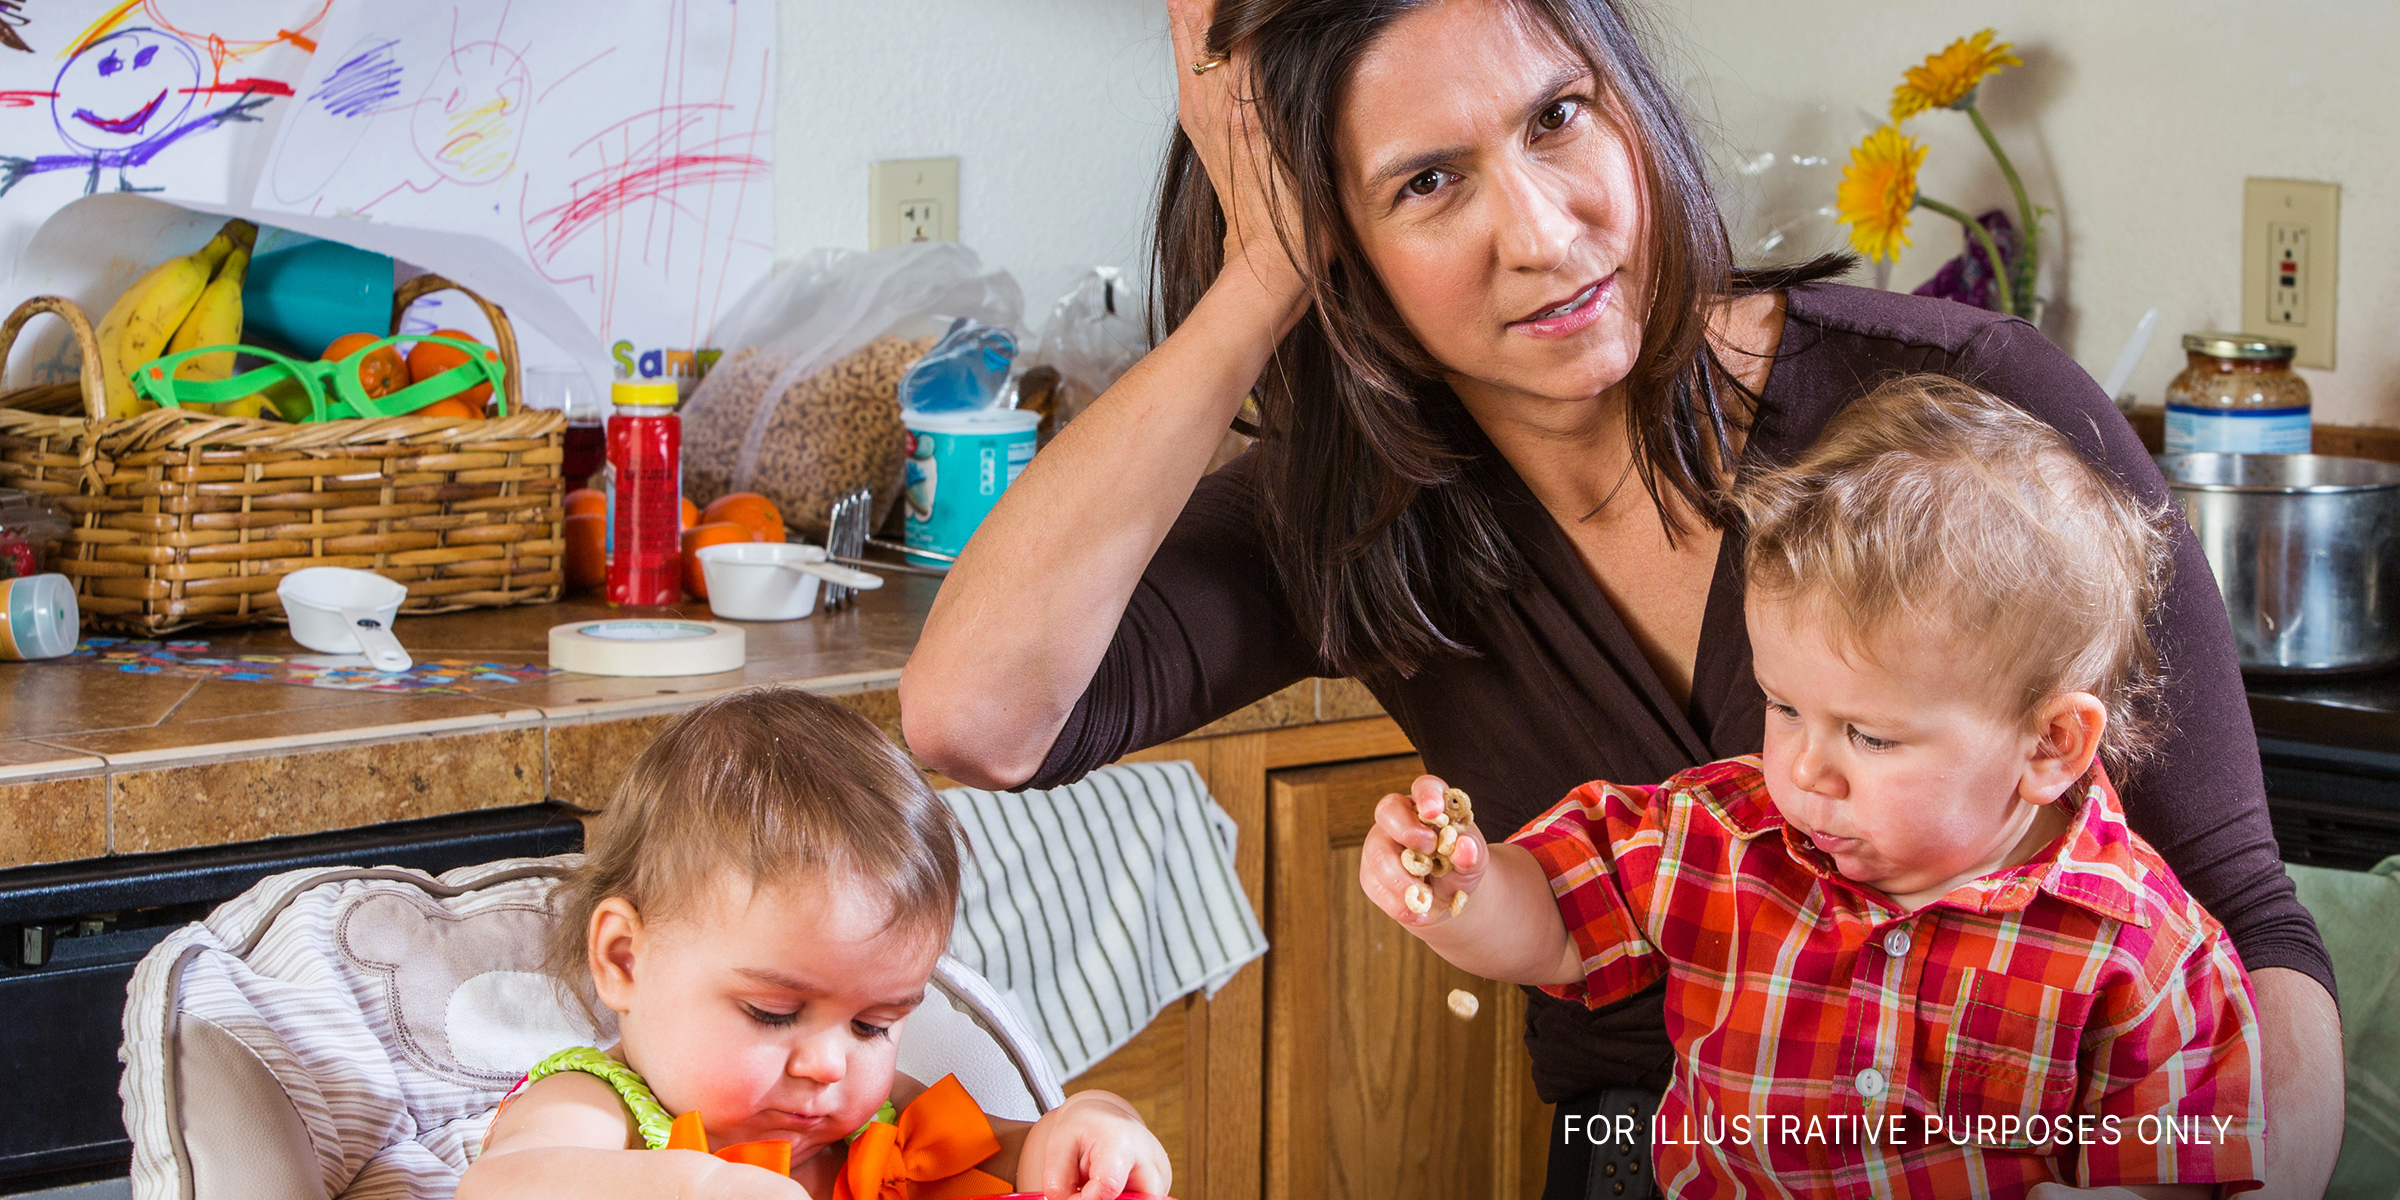 A stressed-out mother in the kitchen with her babies | Source: Shutterstock